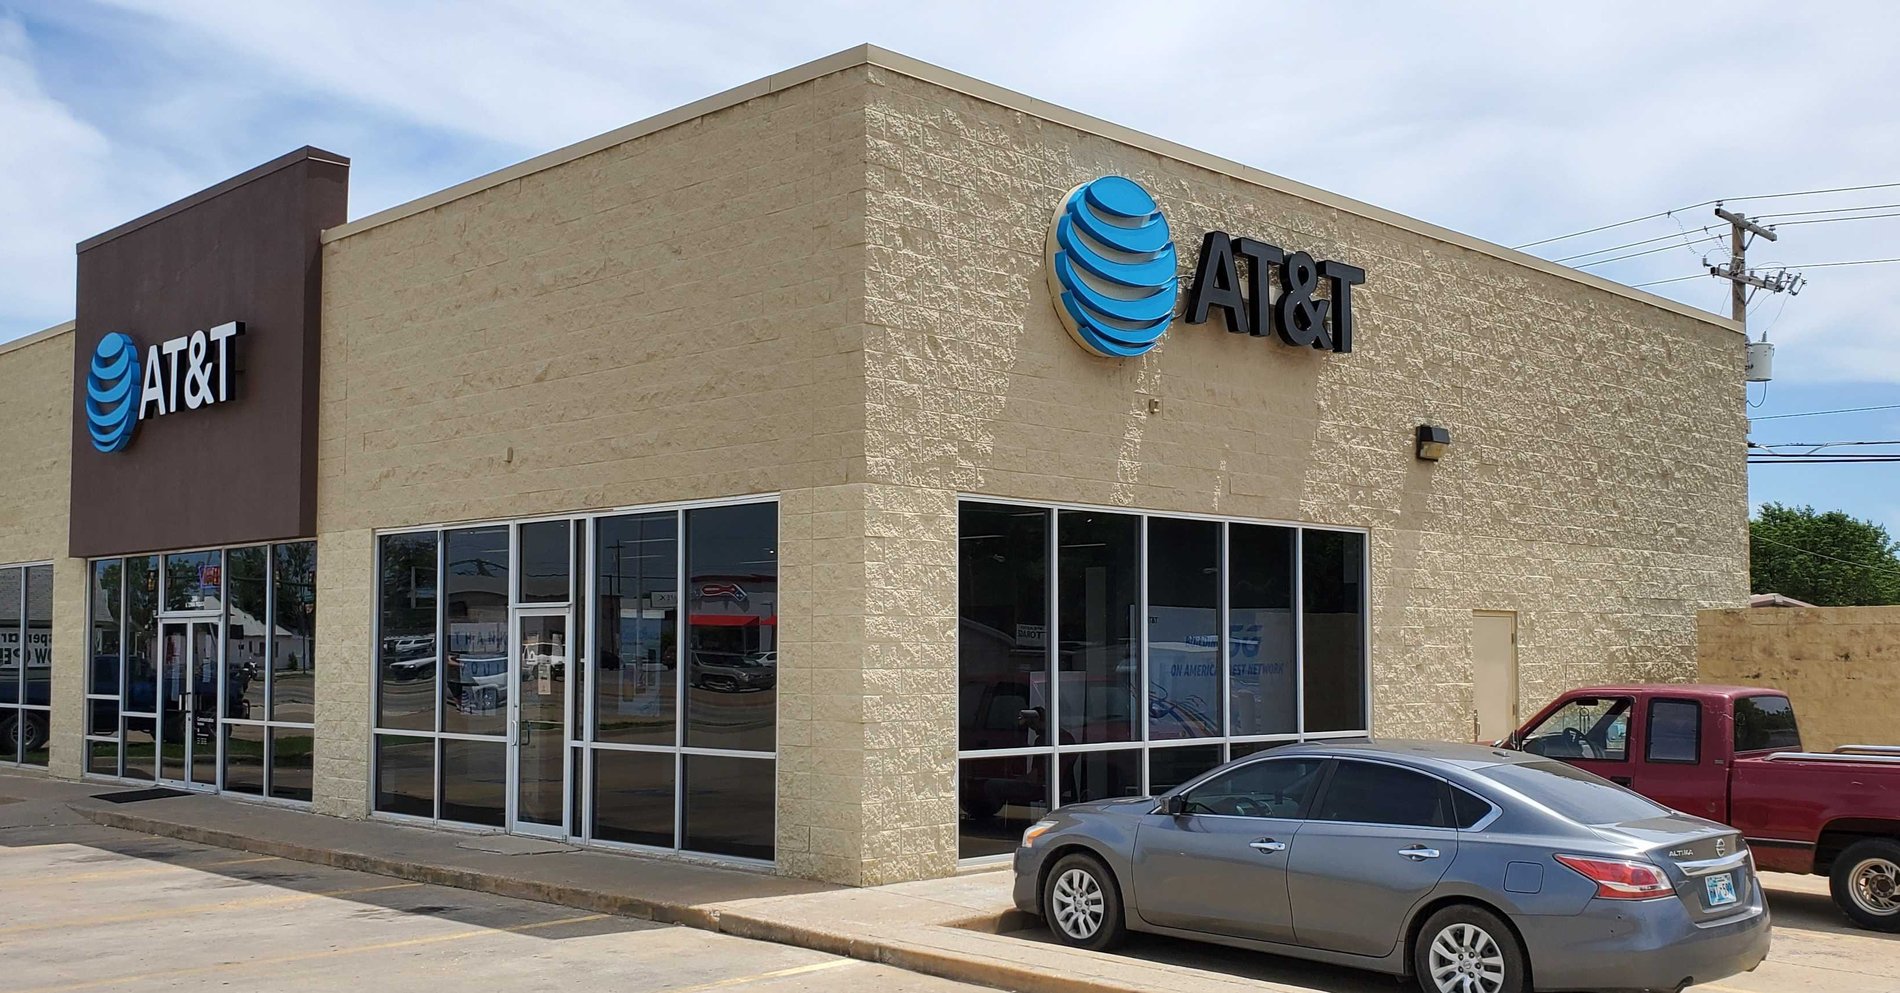 We are your local Claremore, OK AT&T Authorized Retailer - Communication Solutions